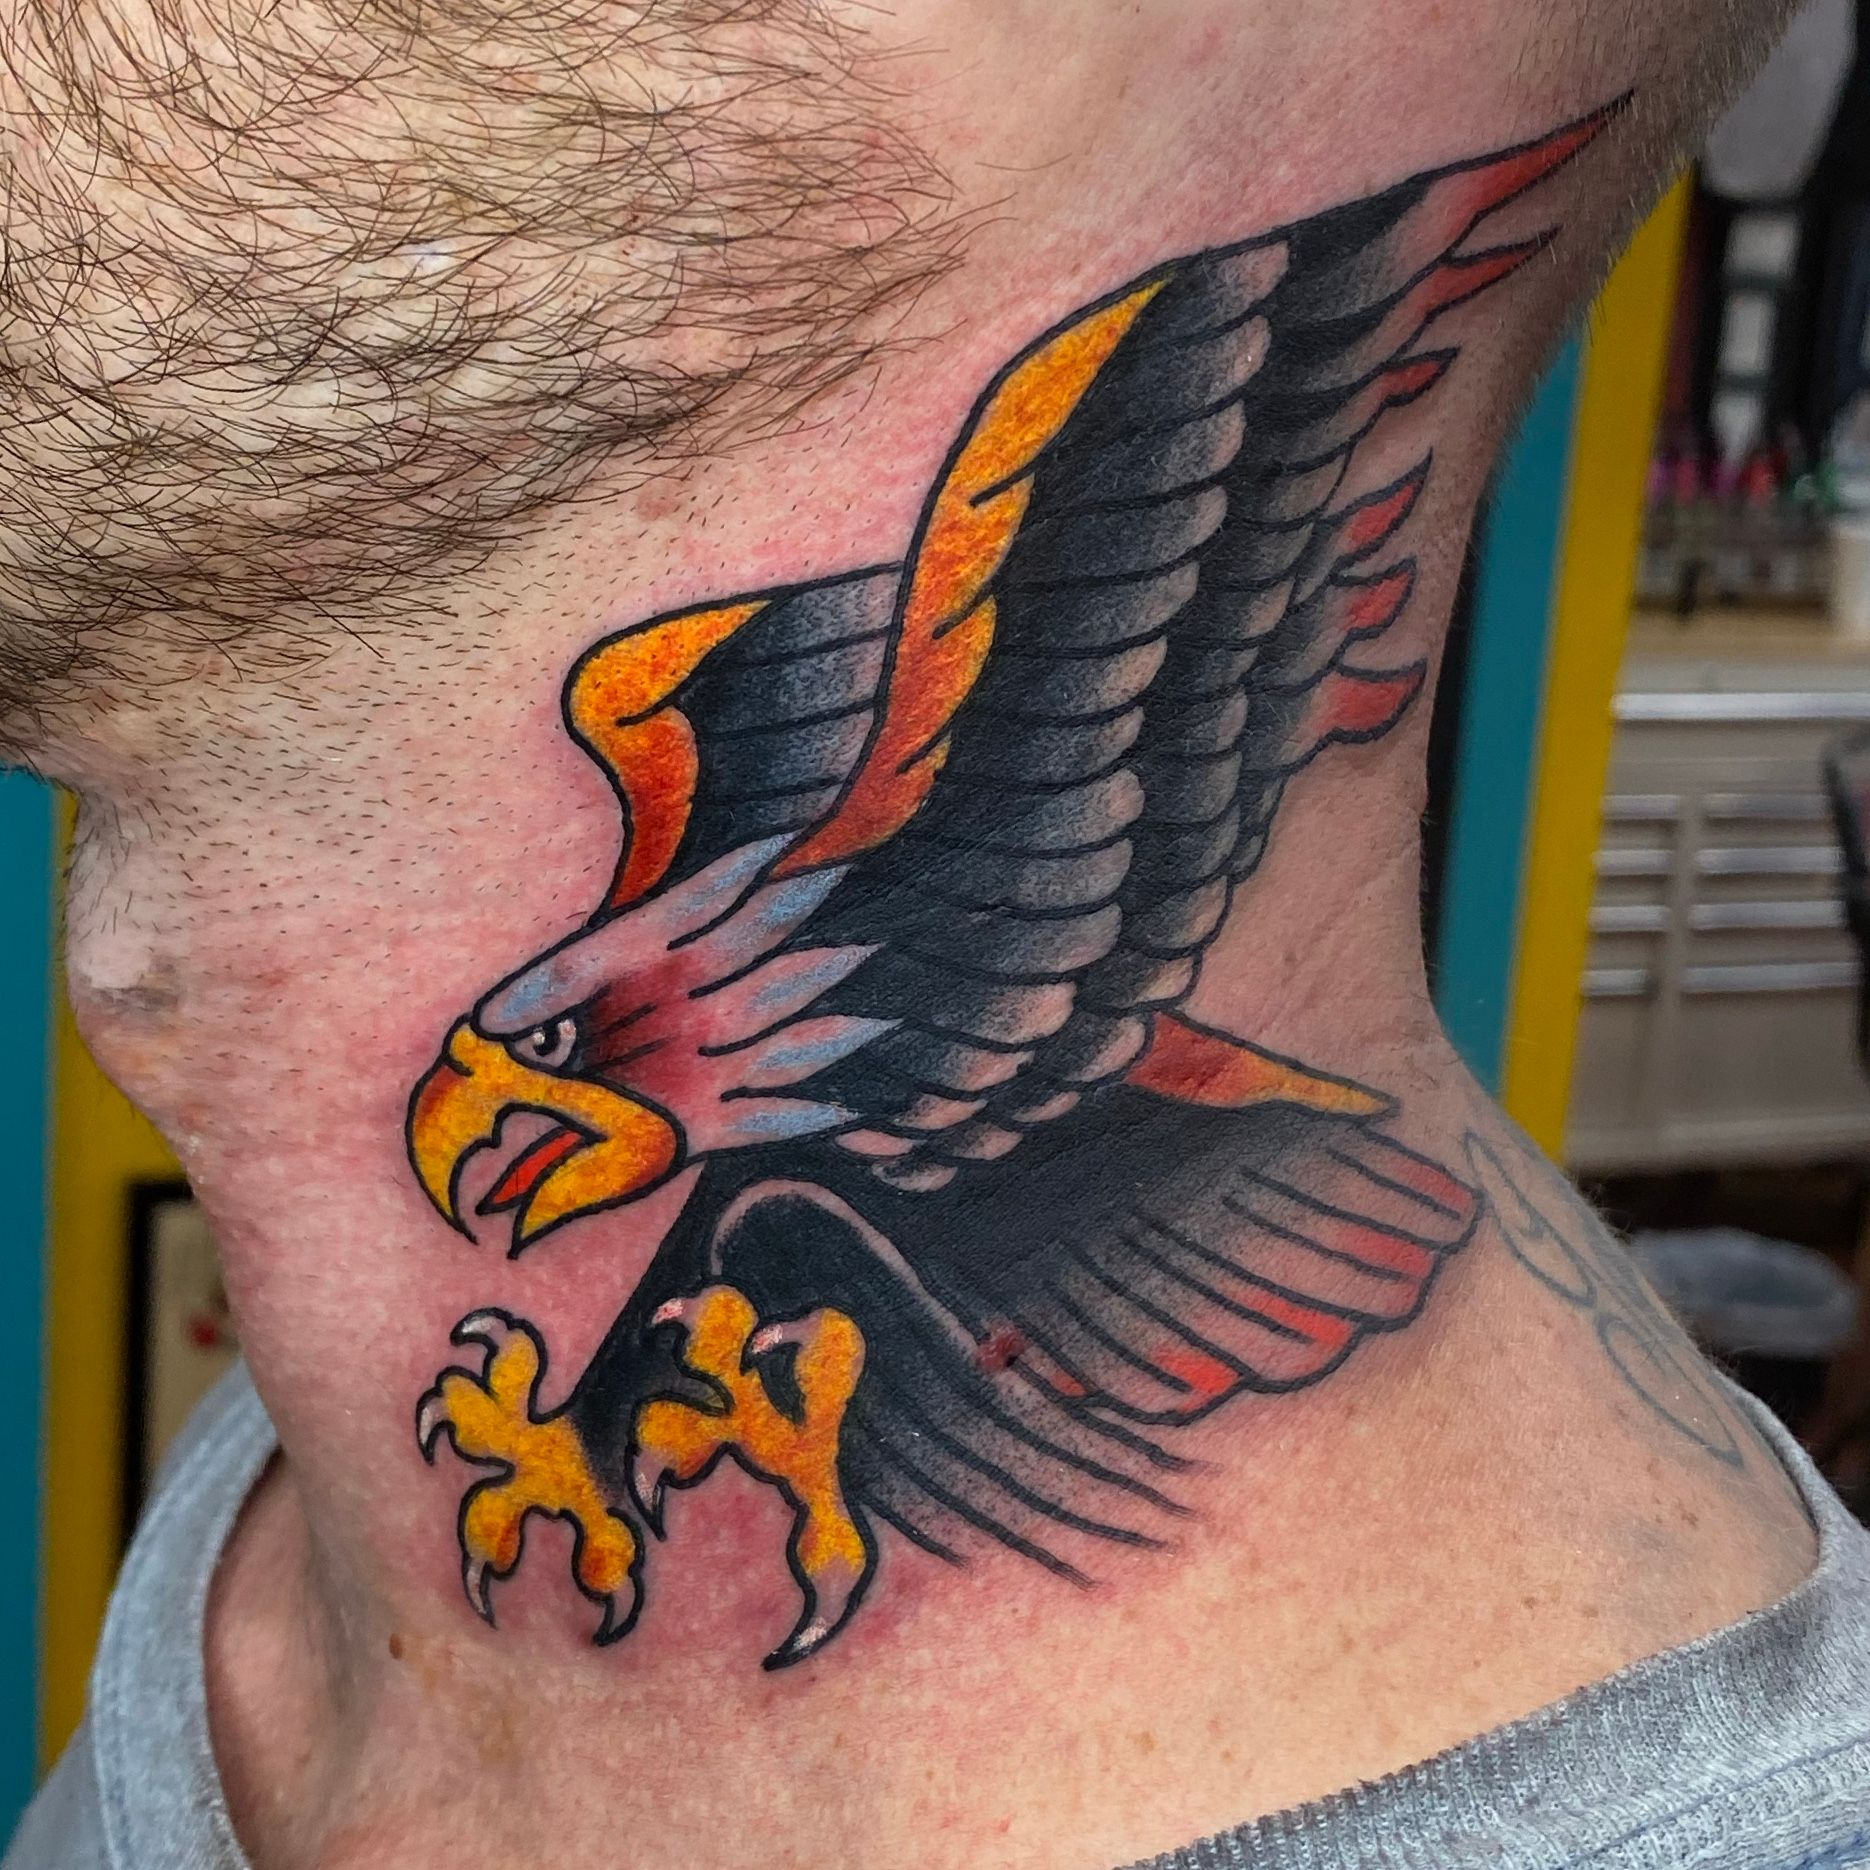 Tattoo uploaded by Vipul Chaudhary • Eagle tattoo |Eagle tattoo design  |Eagal tattoo ideas |Tattoo for boys |Boys tattoo ideas • Tattoodo